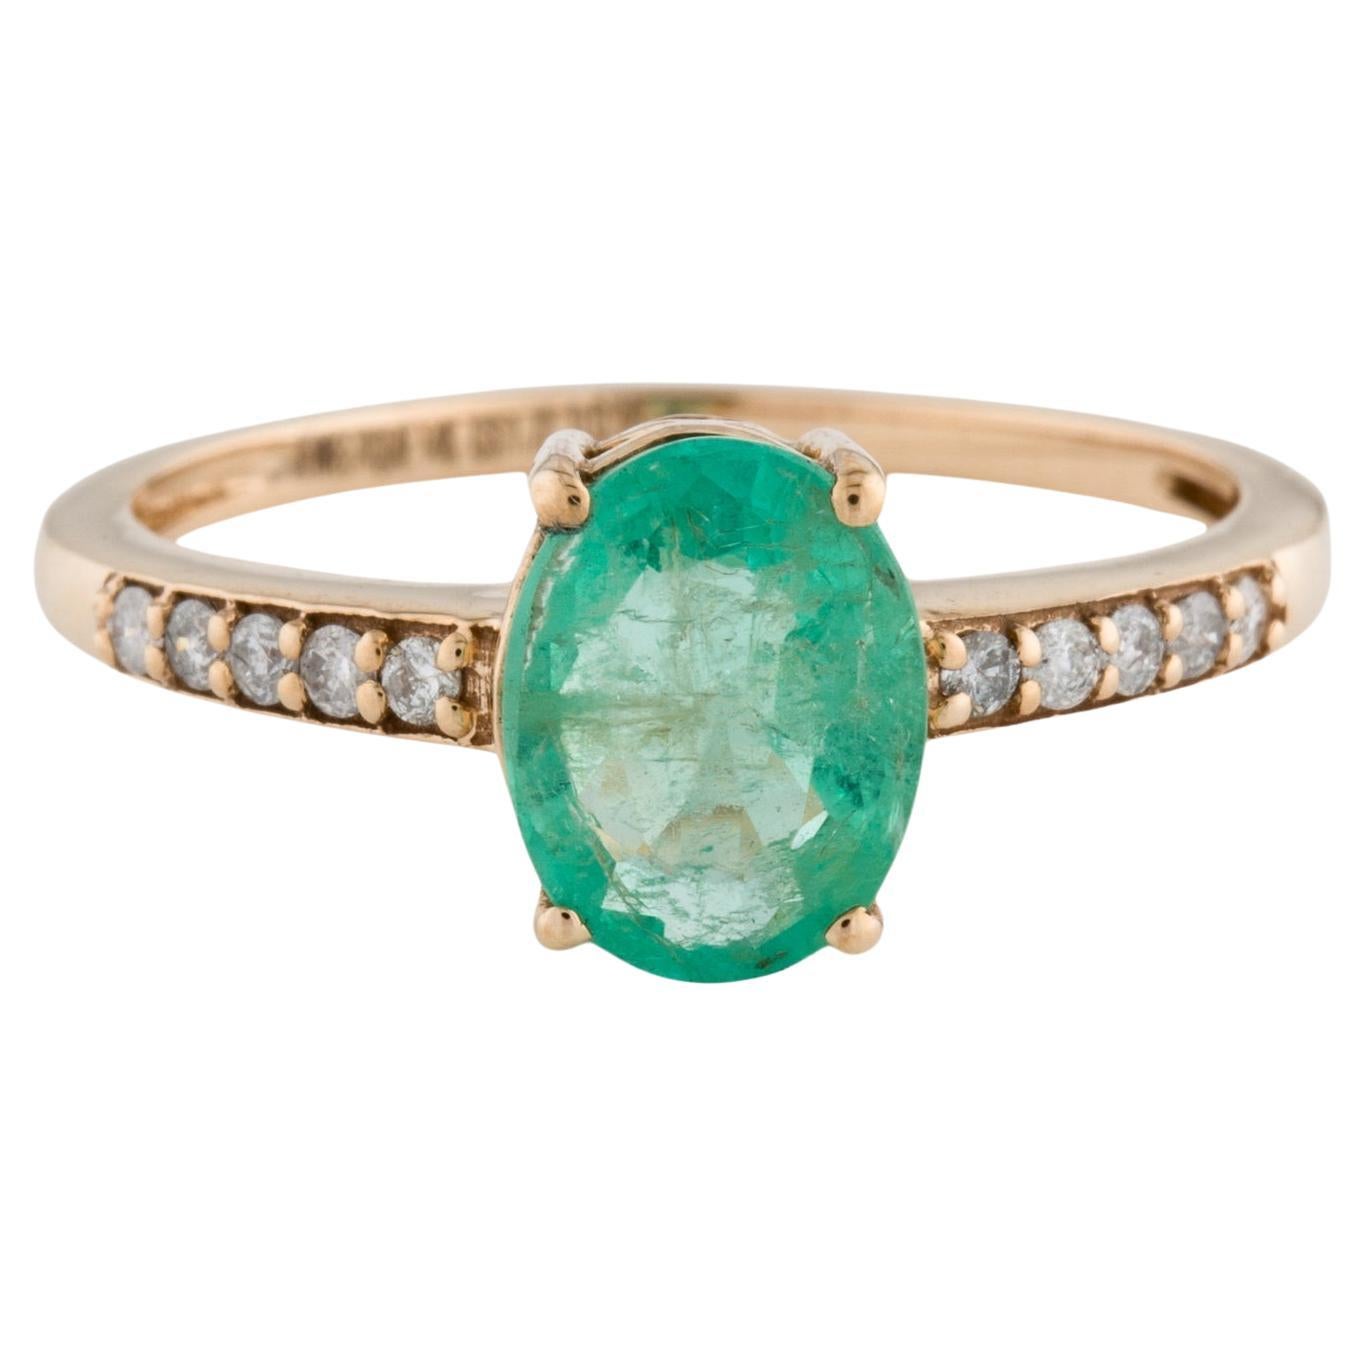 Gorgeous 14K Gold 1.72ct Emerald & Diamond Ring - Size 8.75 - Timeless Luxury For Sale